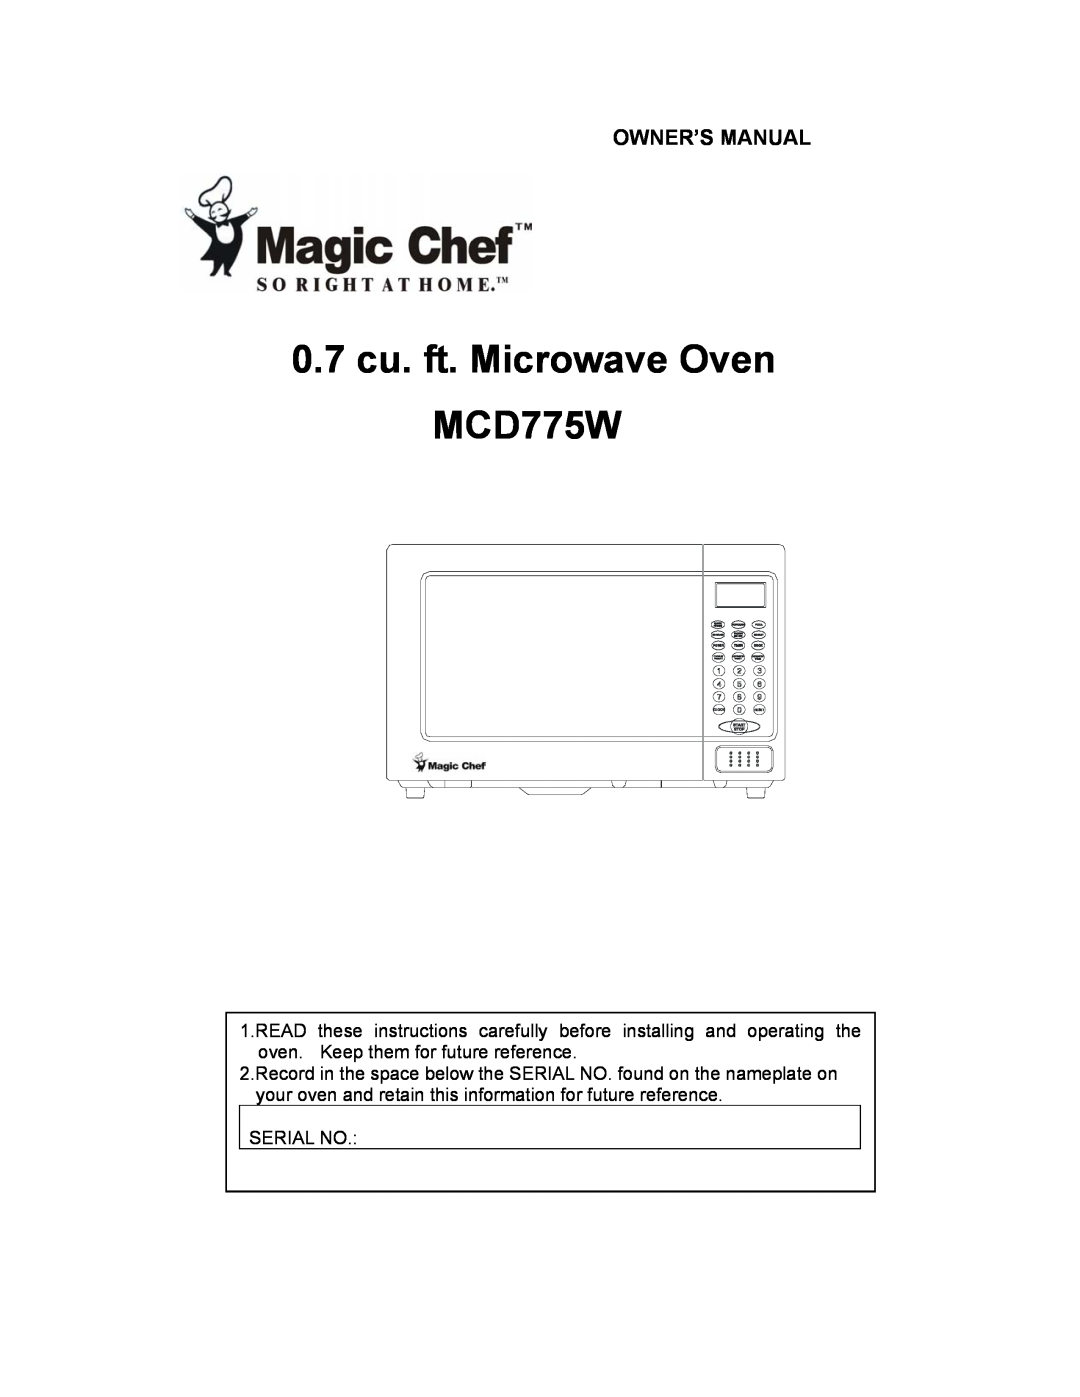 Magic Chef owner manual 0.7cu. ft. Microwave Oven MCD775W 